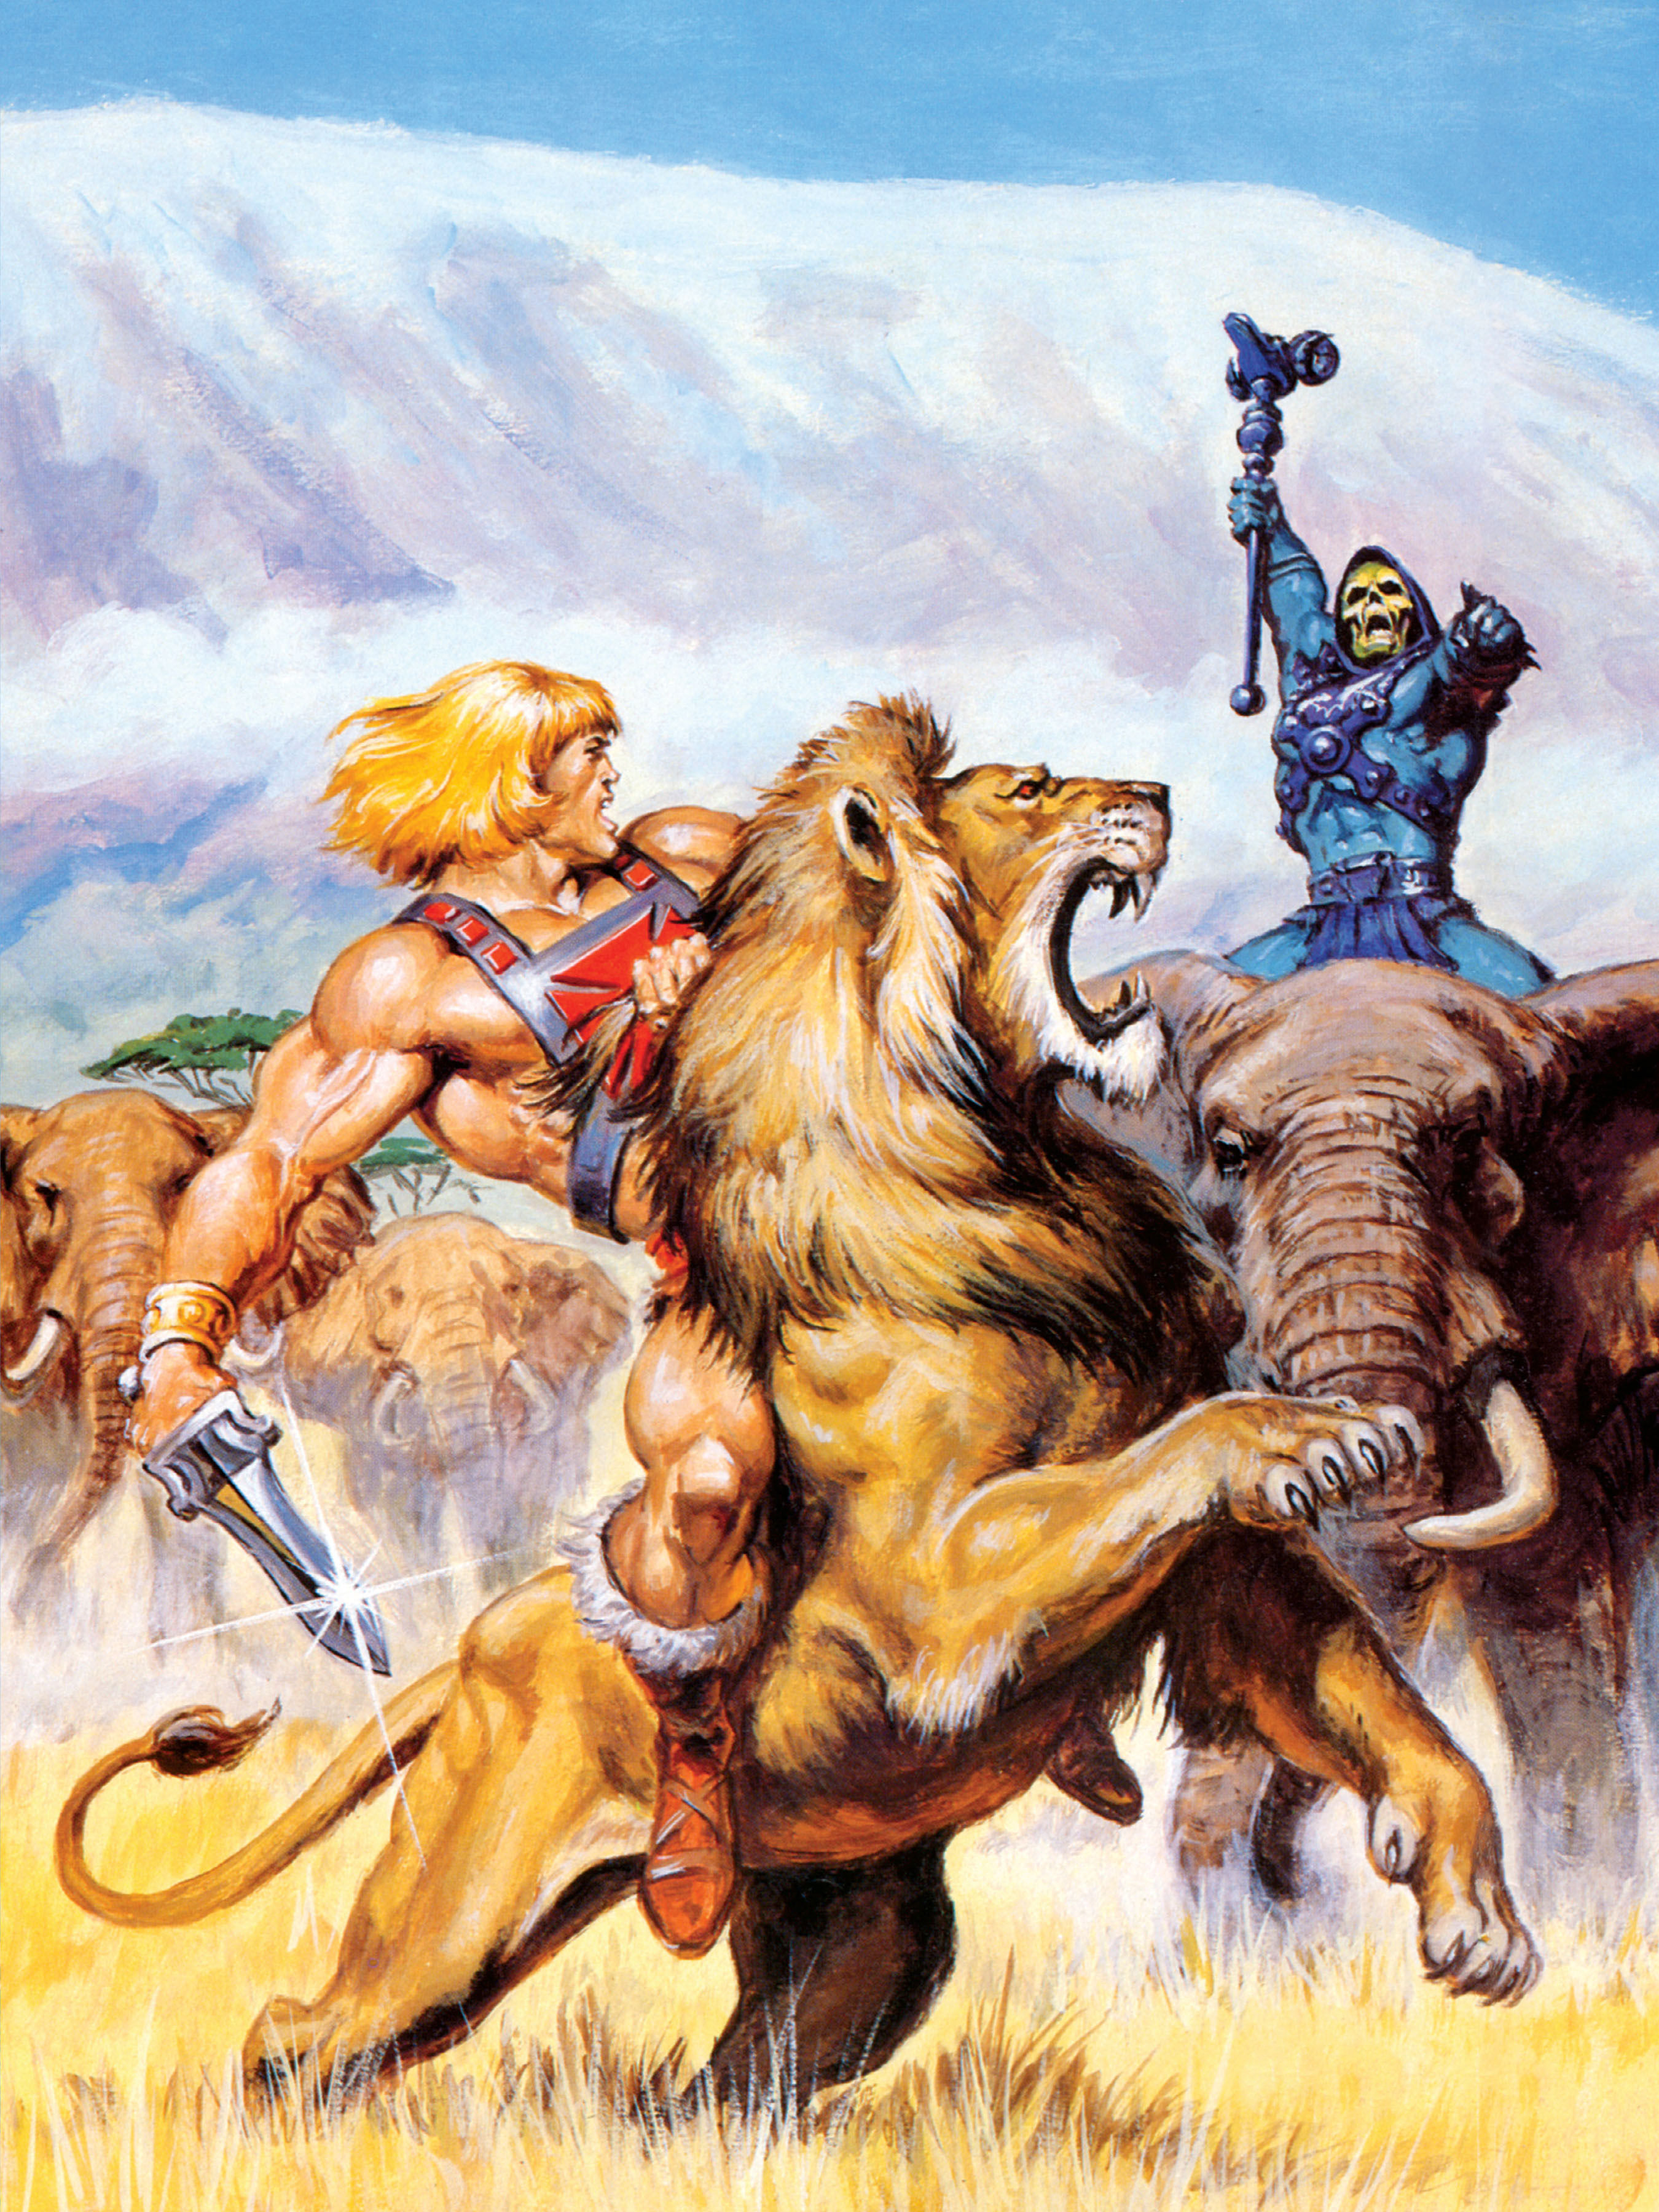 He-Man and the Masters of the Universe Art